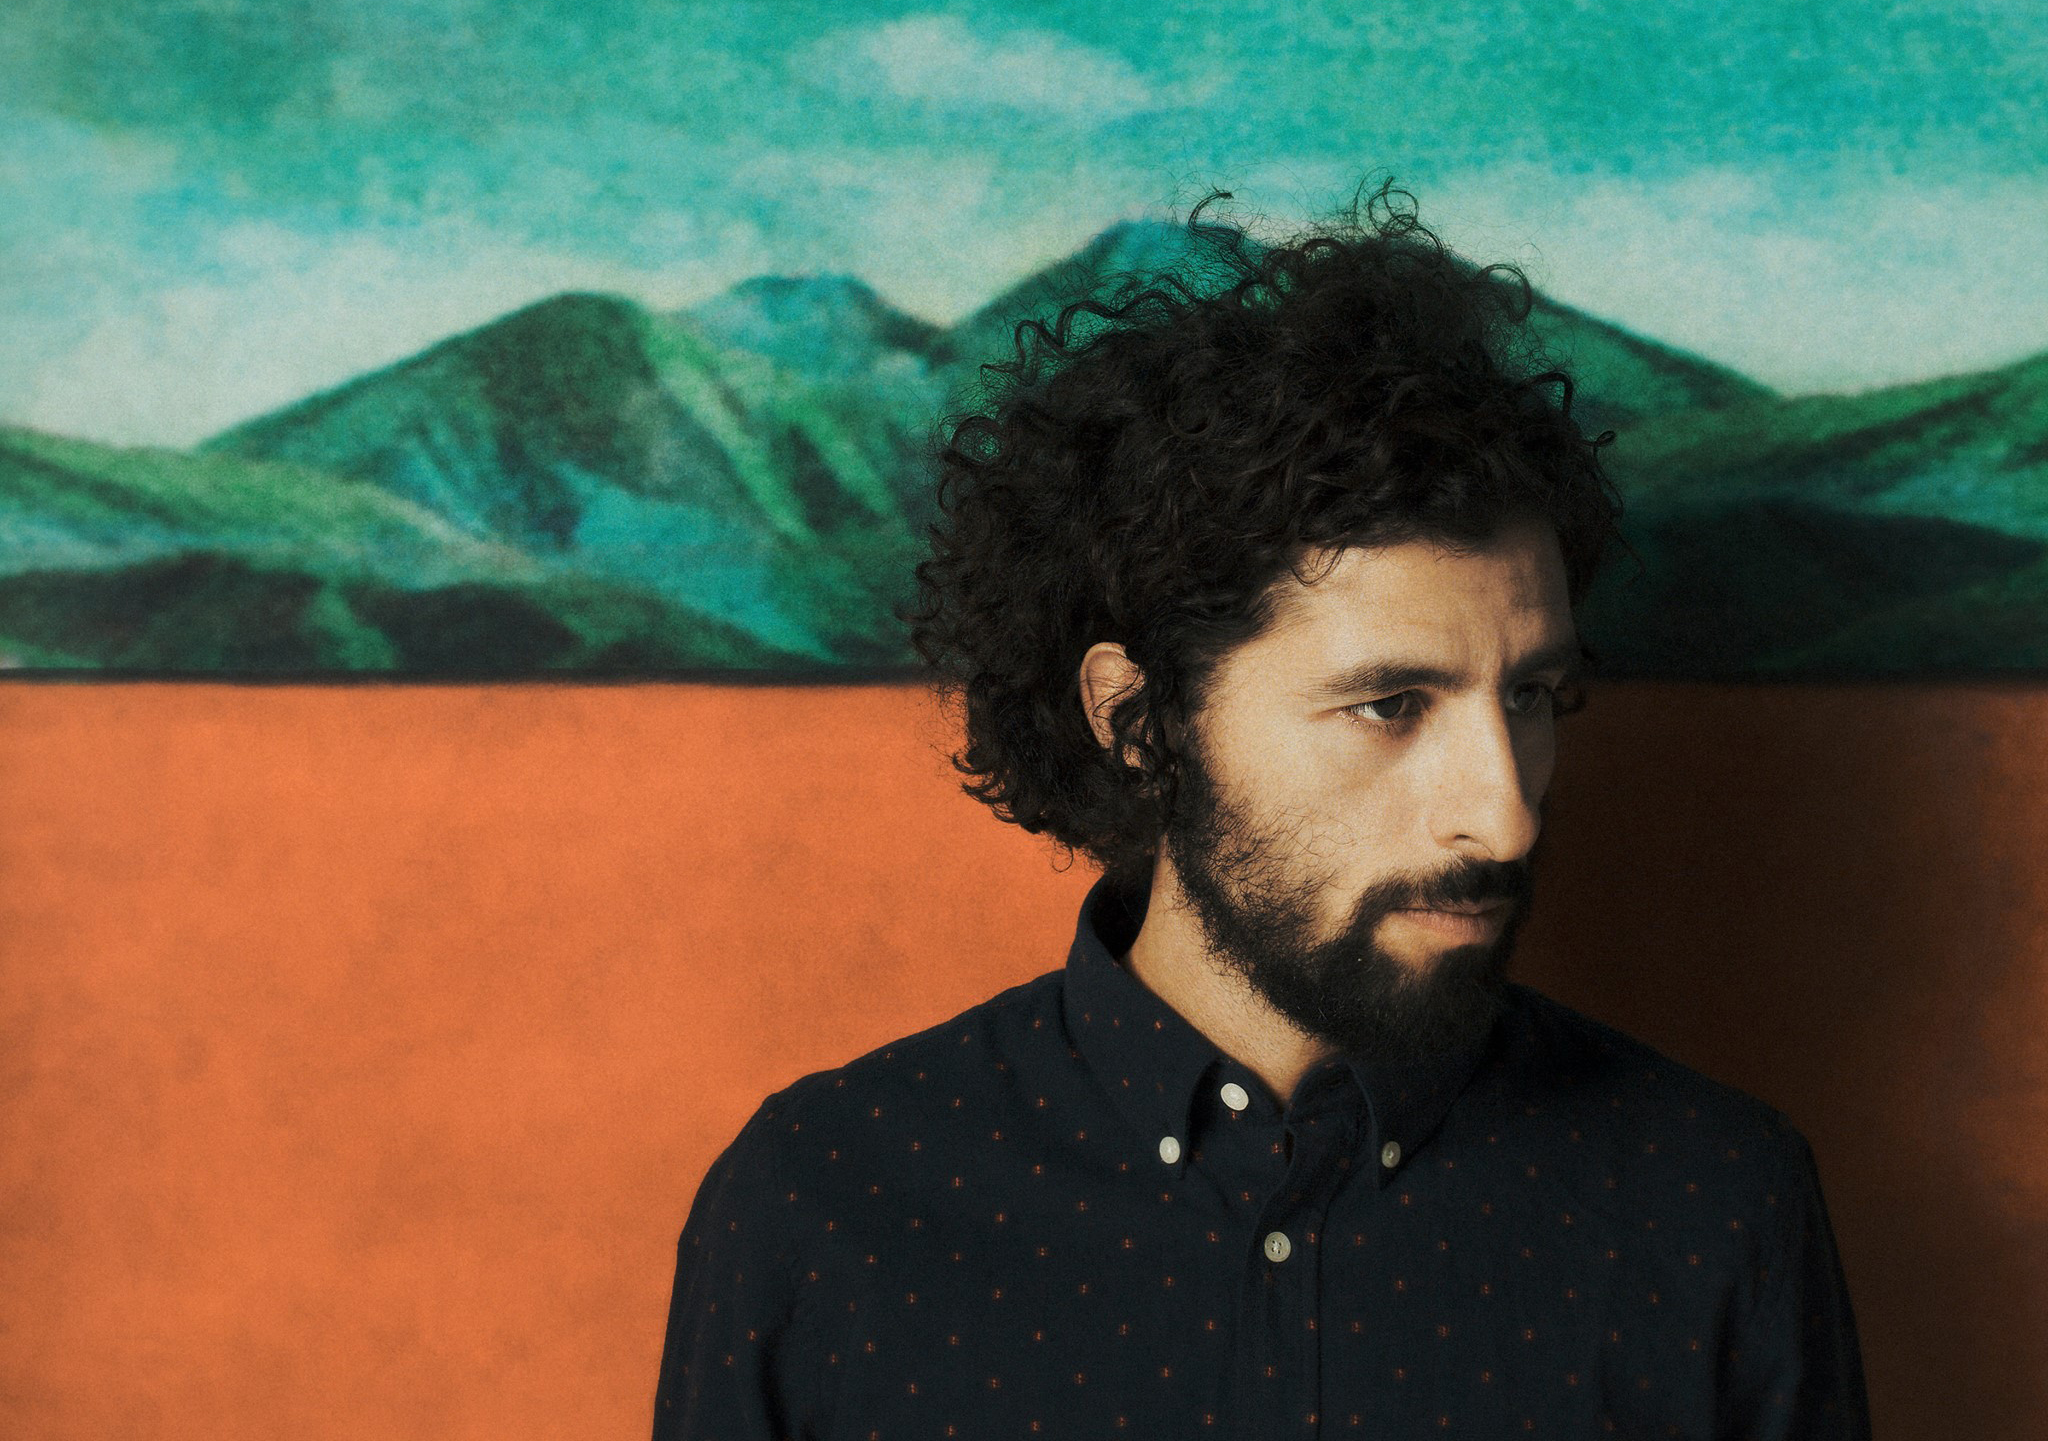 Some nice folksy vibes for fans of Jose Gonzalez